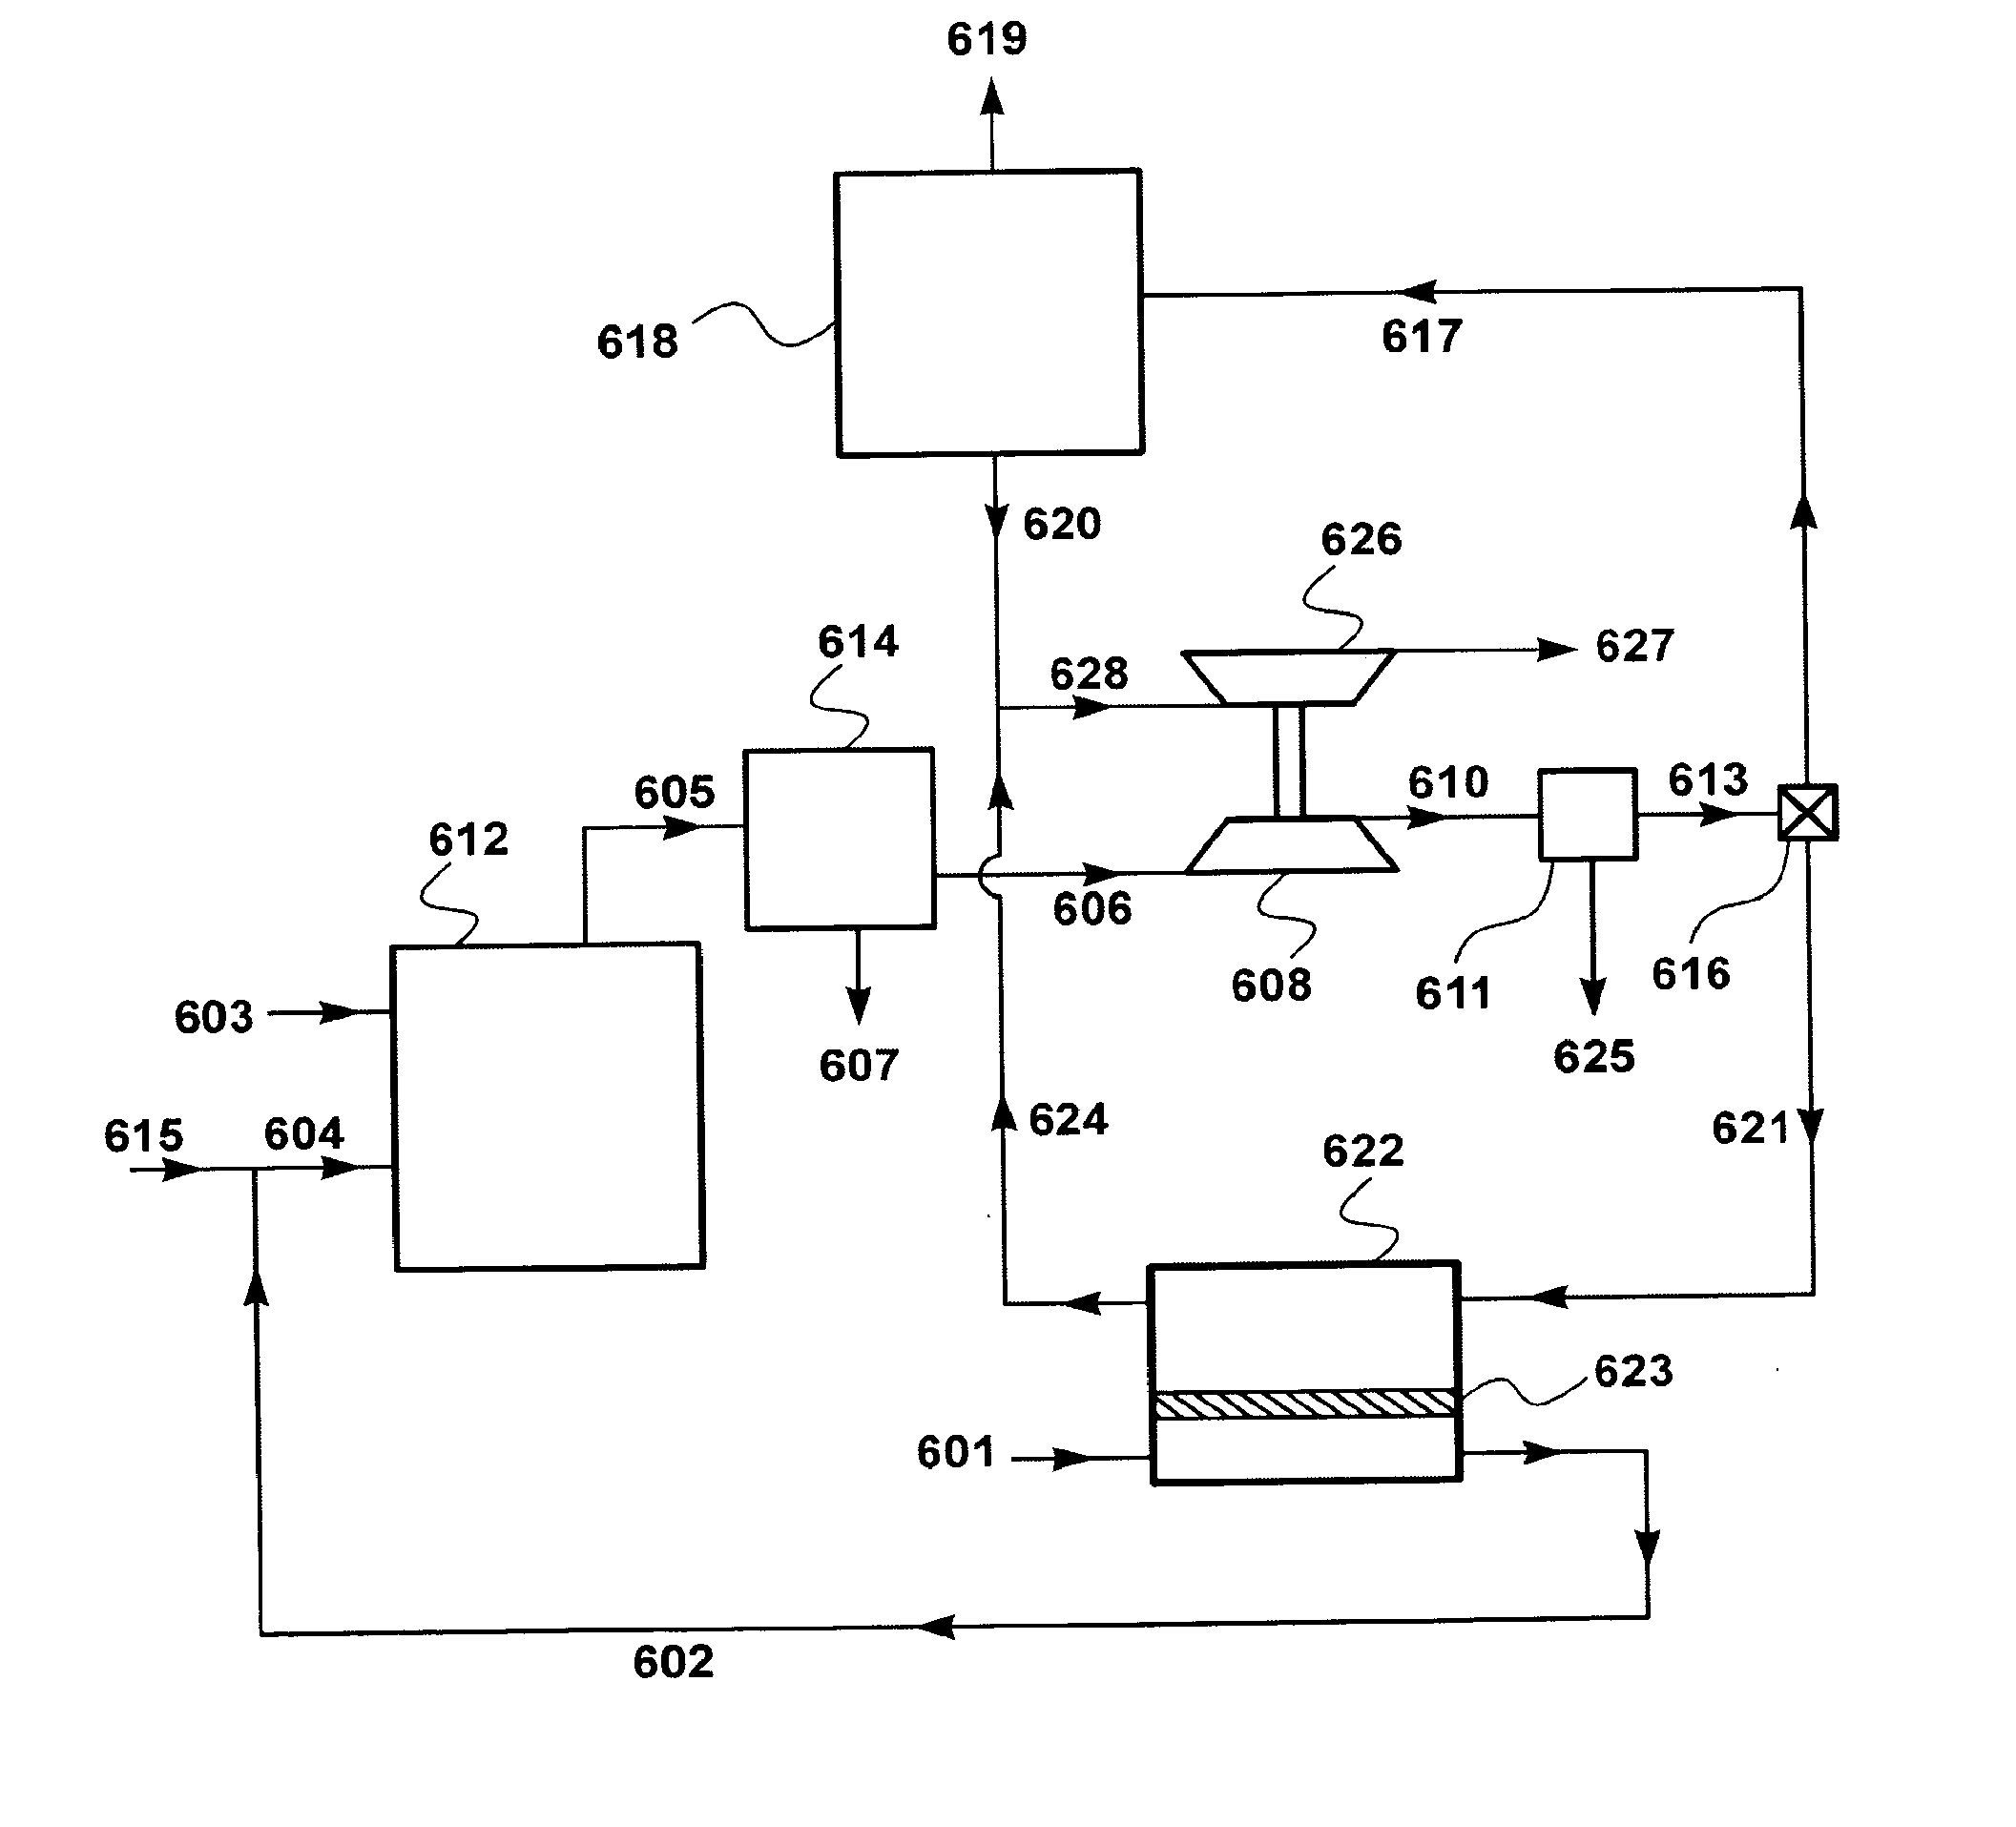 Process for separating carbon dioxide from flue gas using sweep-based membrane separation and absorption steps